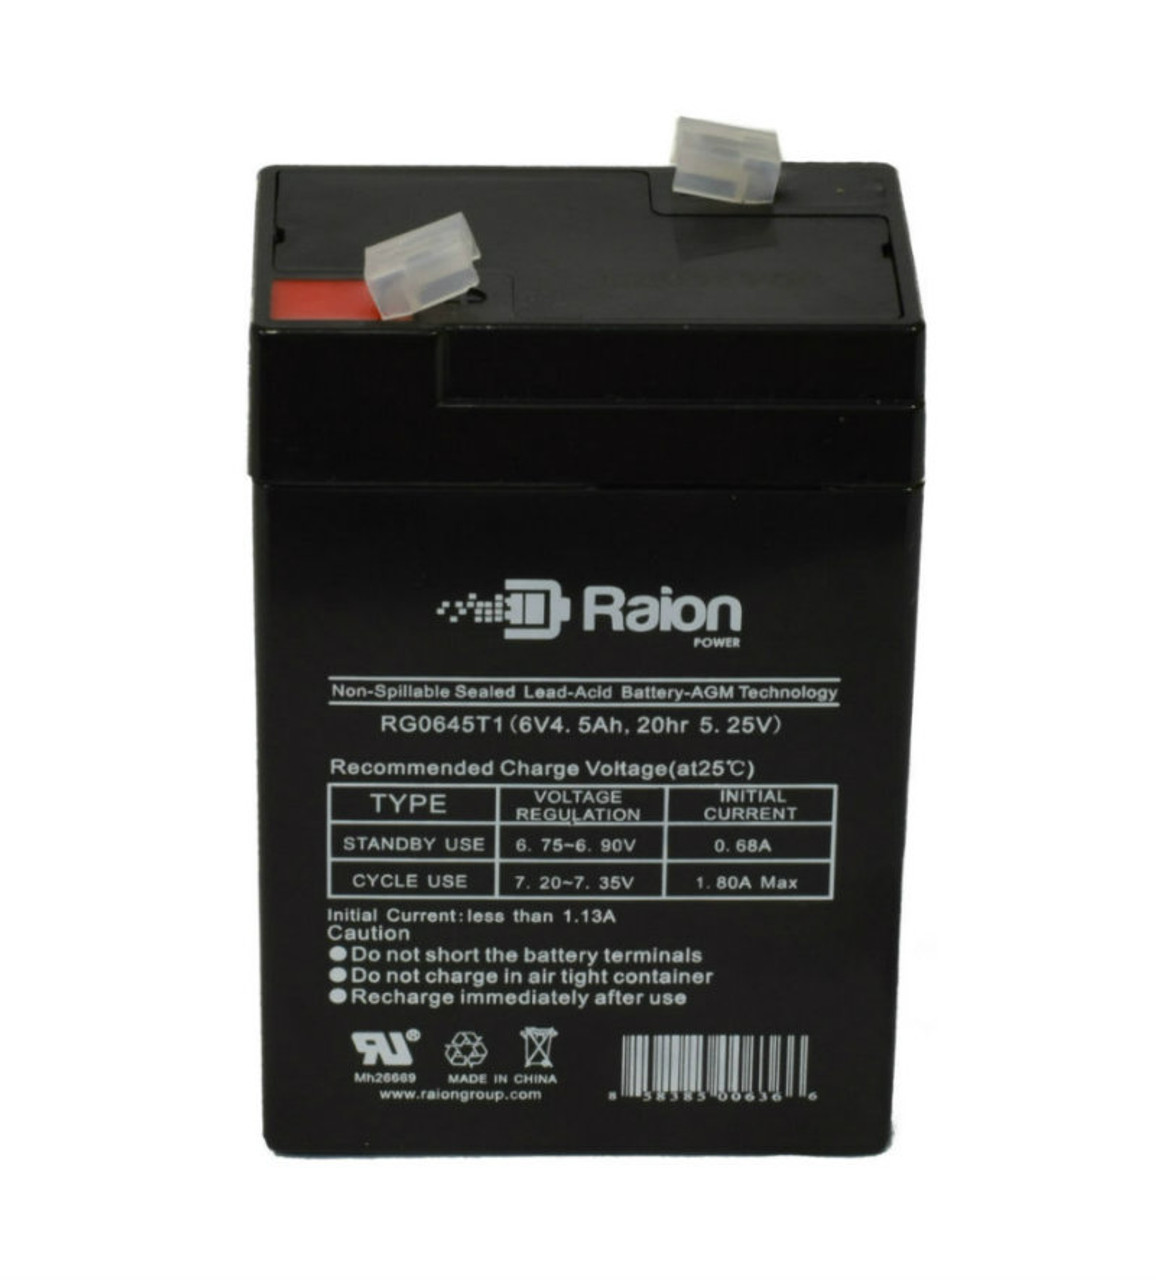 Raion Power RG0645T1 Replacement Battery Cartridge for Monaghan Medical Respiratory Therapy Unit